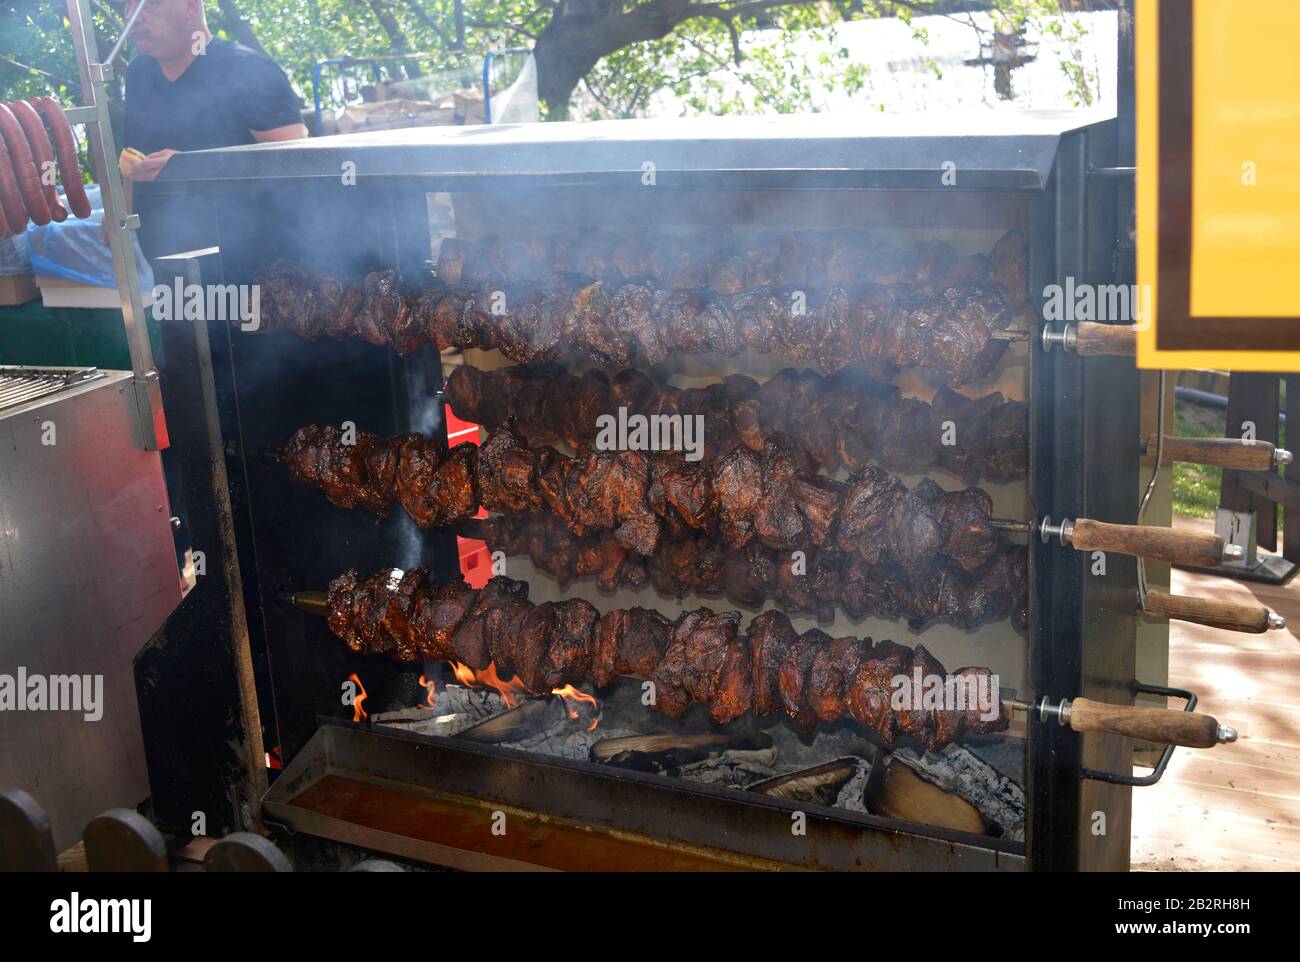 Braten Grill High Resolution Stock Photography and Images - Alamy